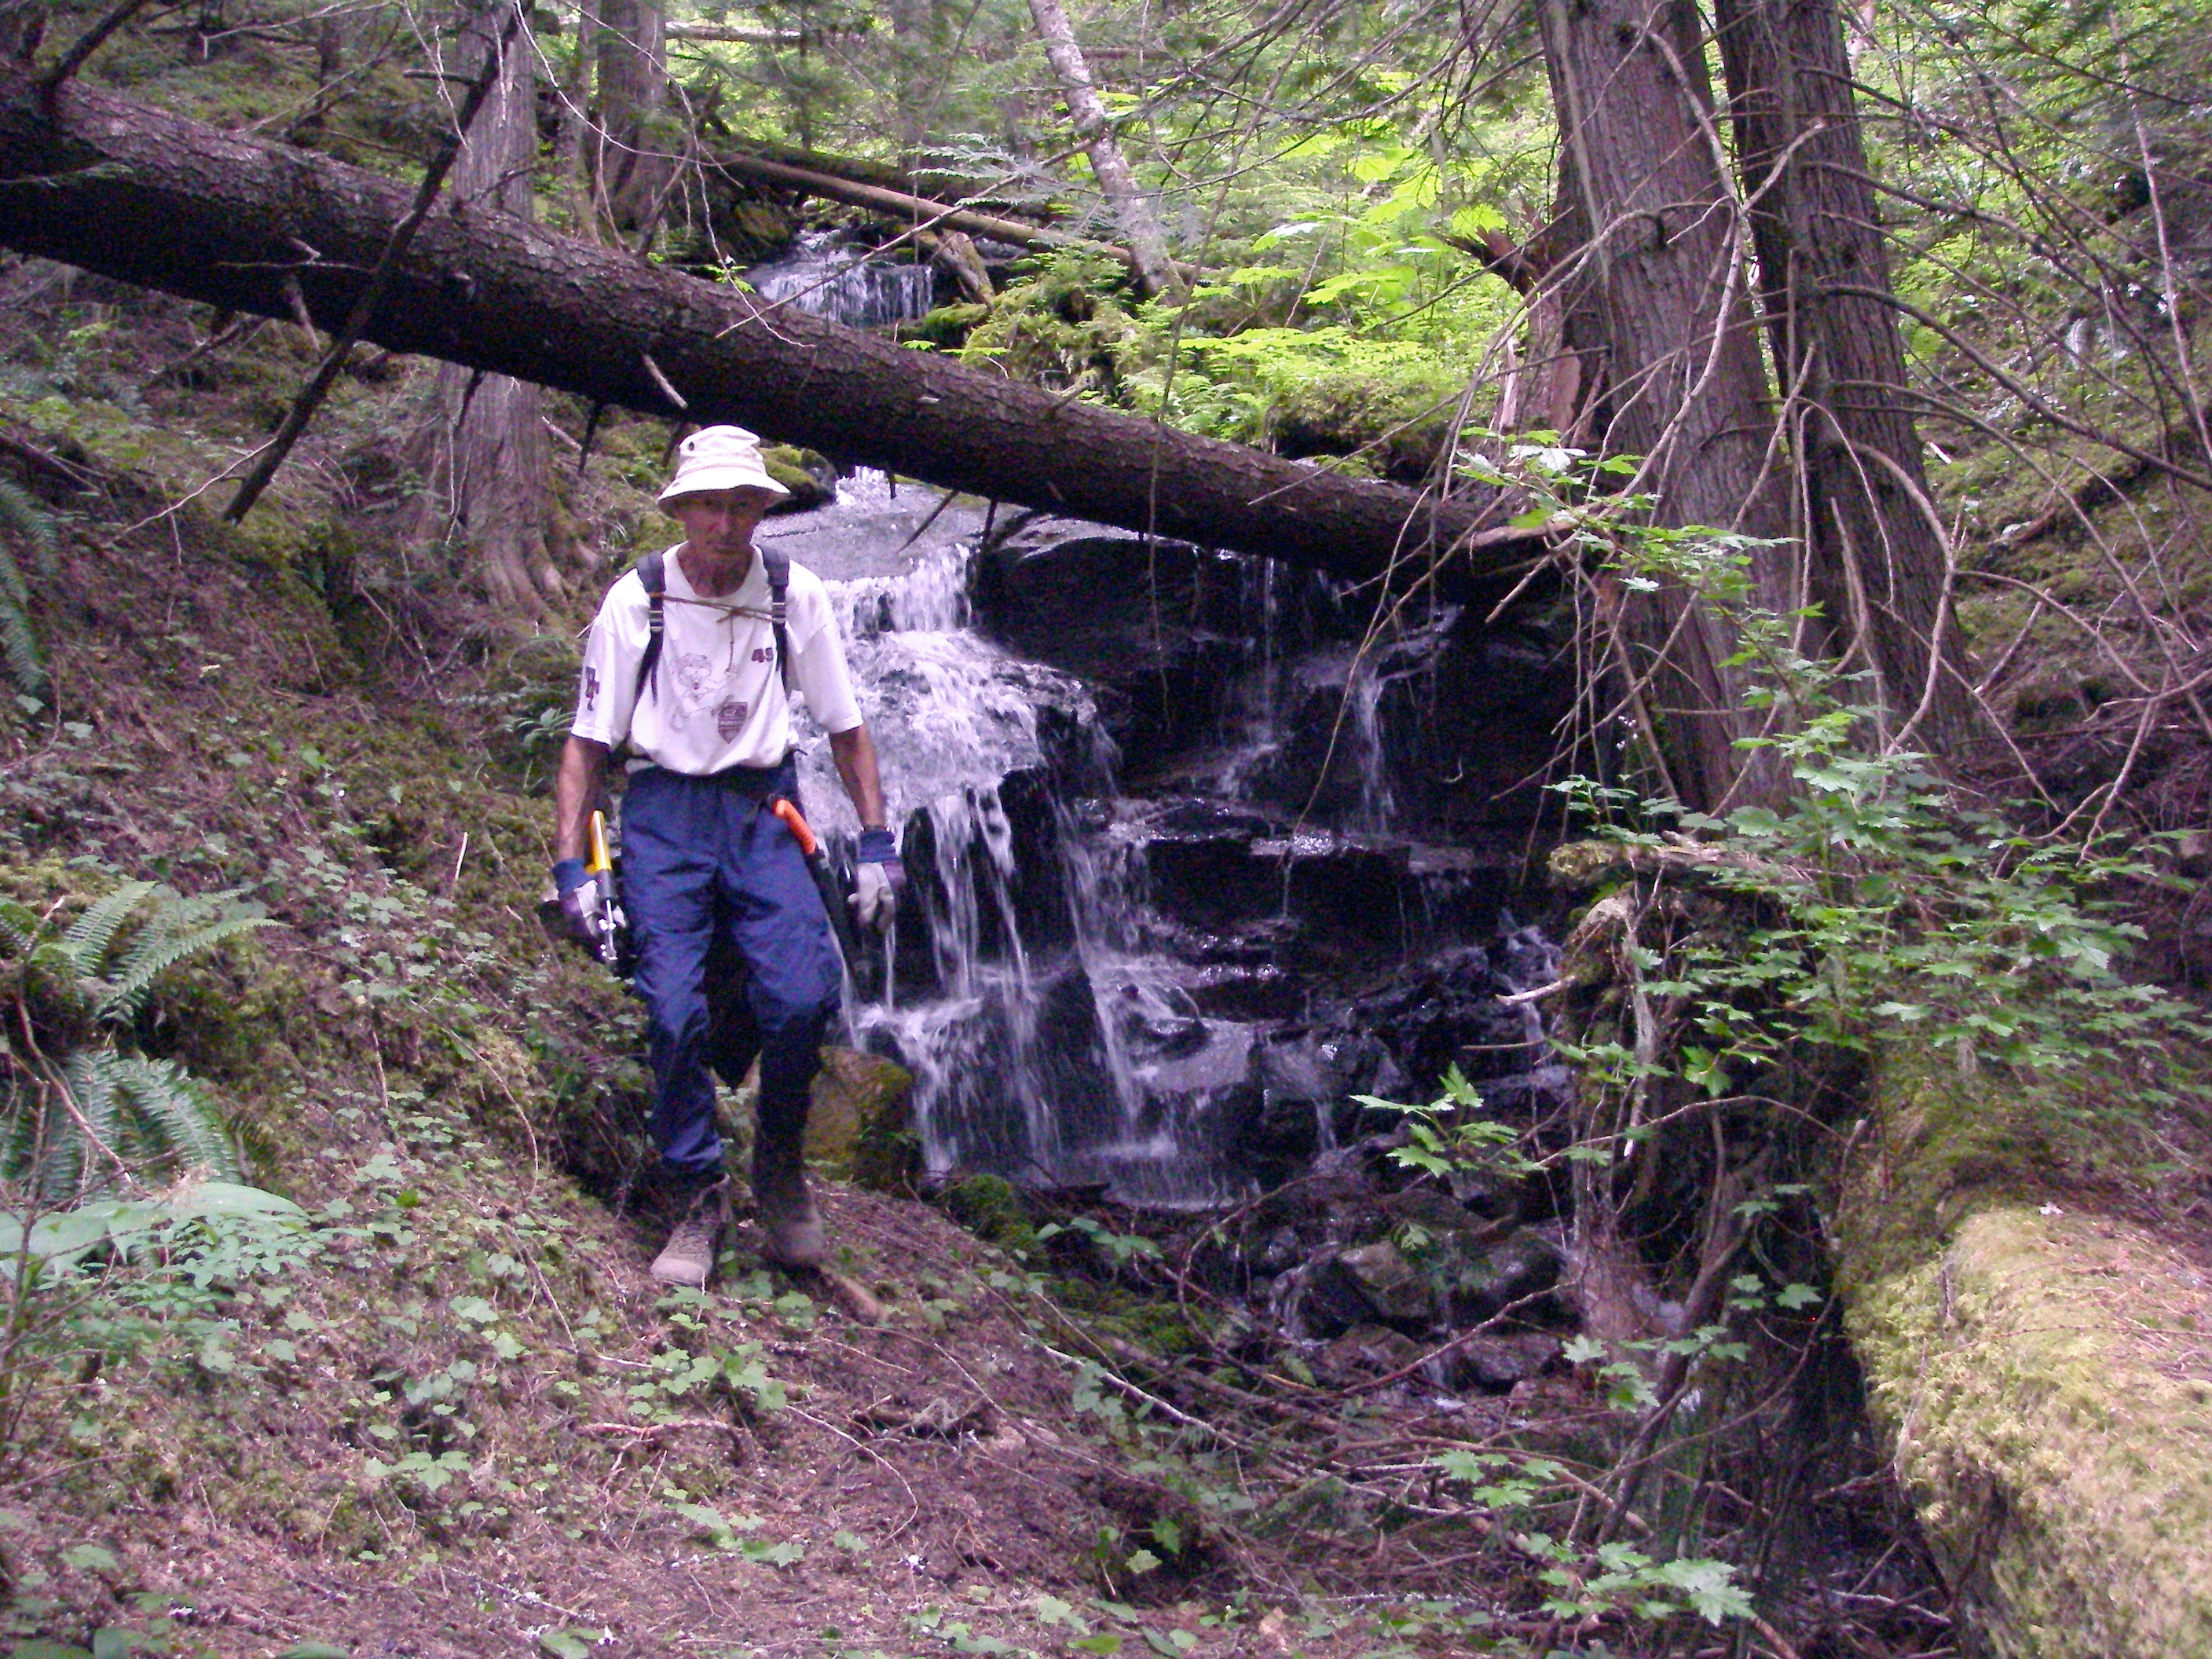 Don Gillespie with his backpack on and clippers in hand in the forest next to a small waterfall.